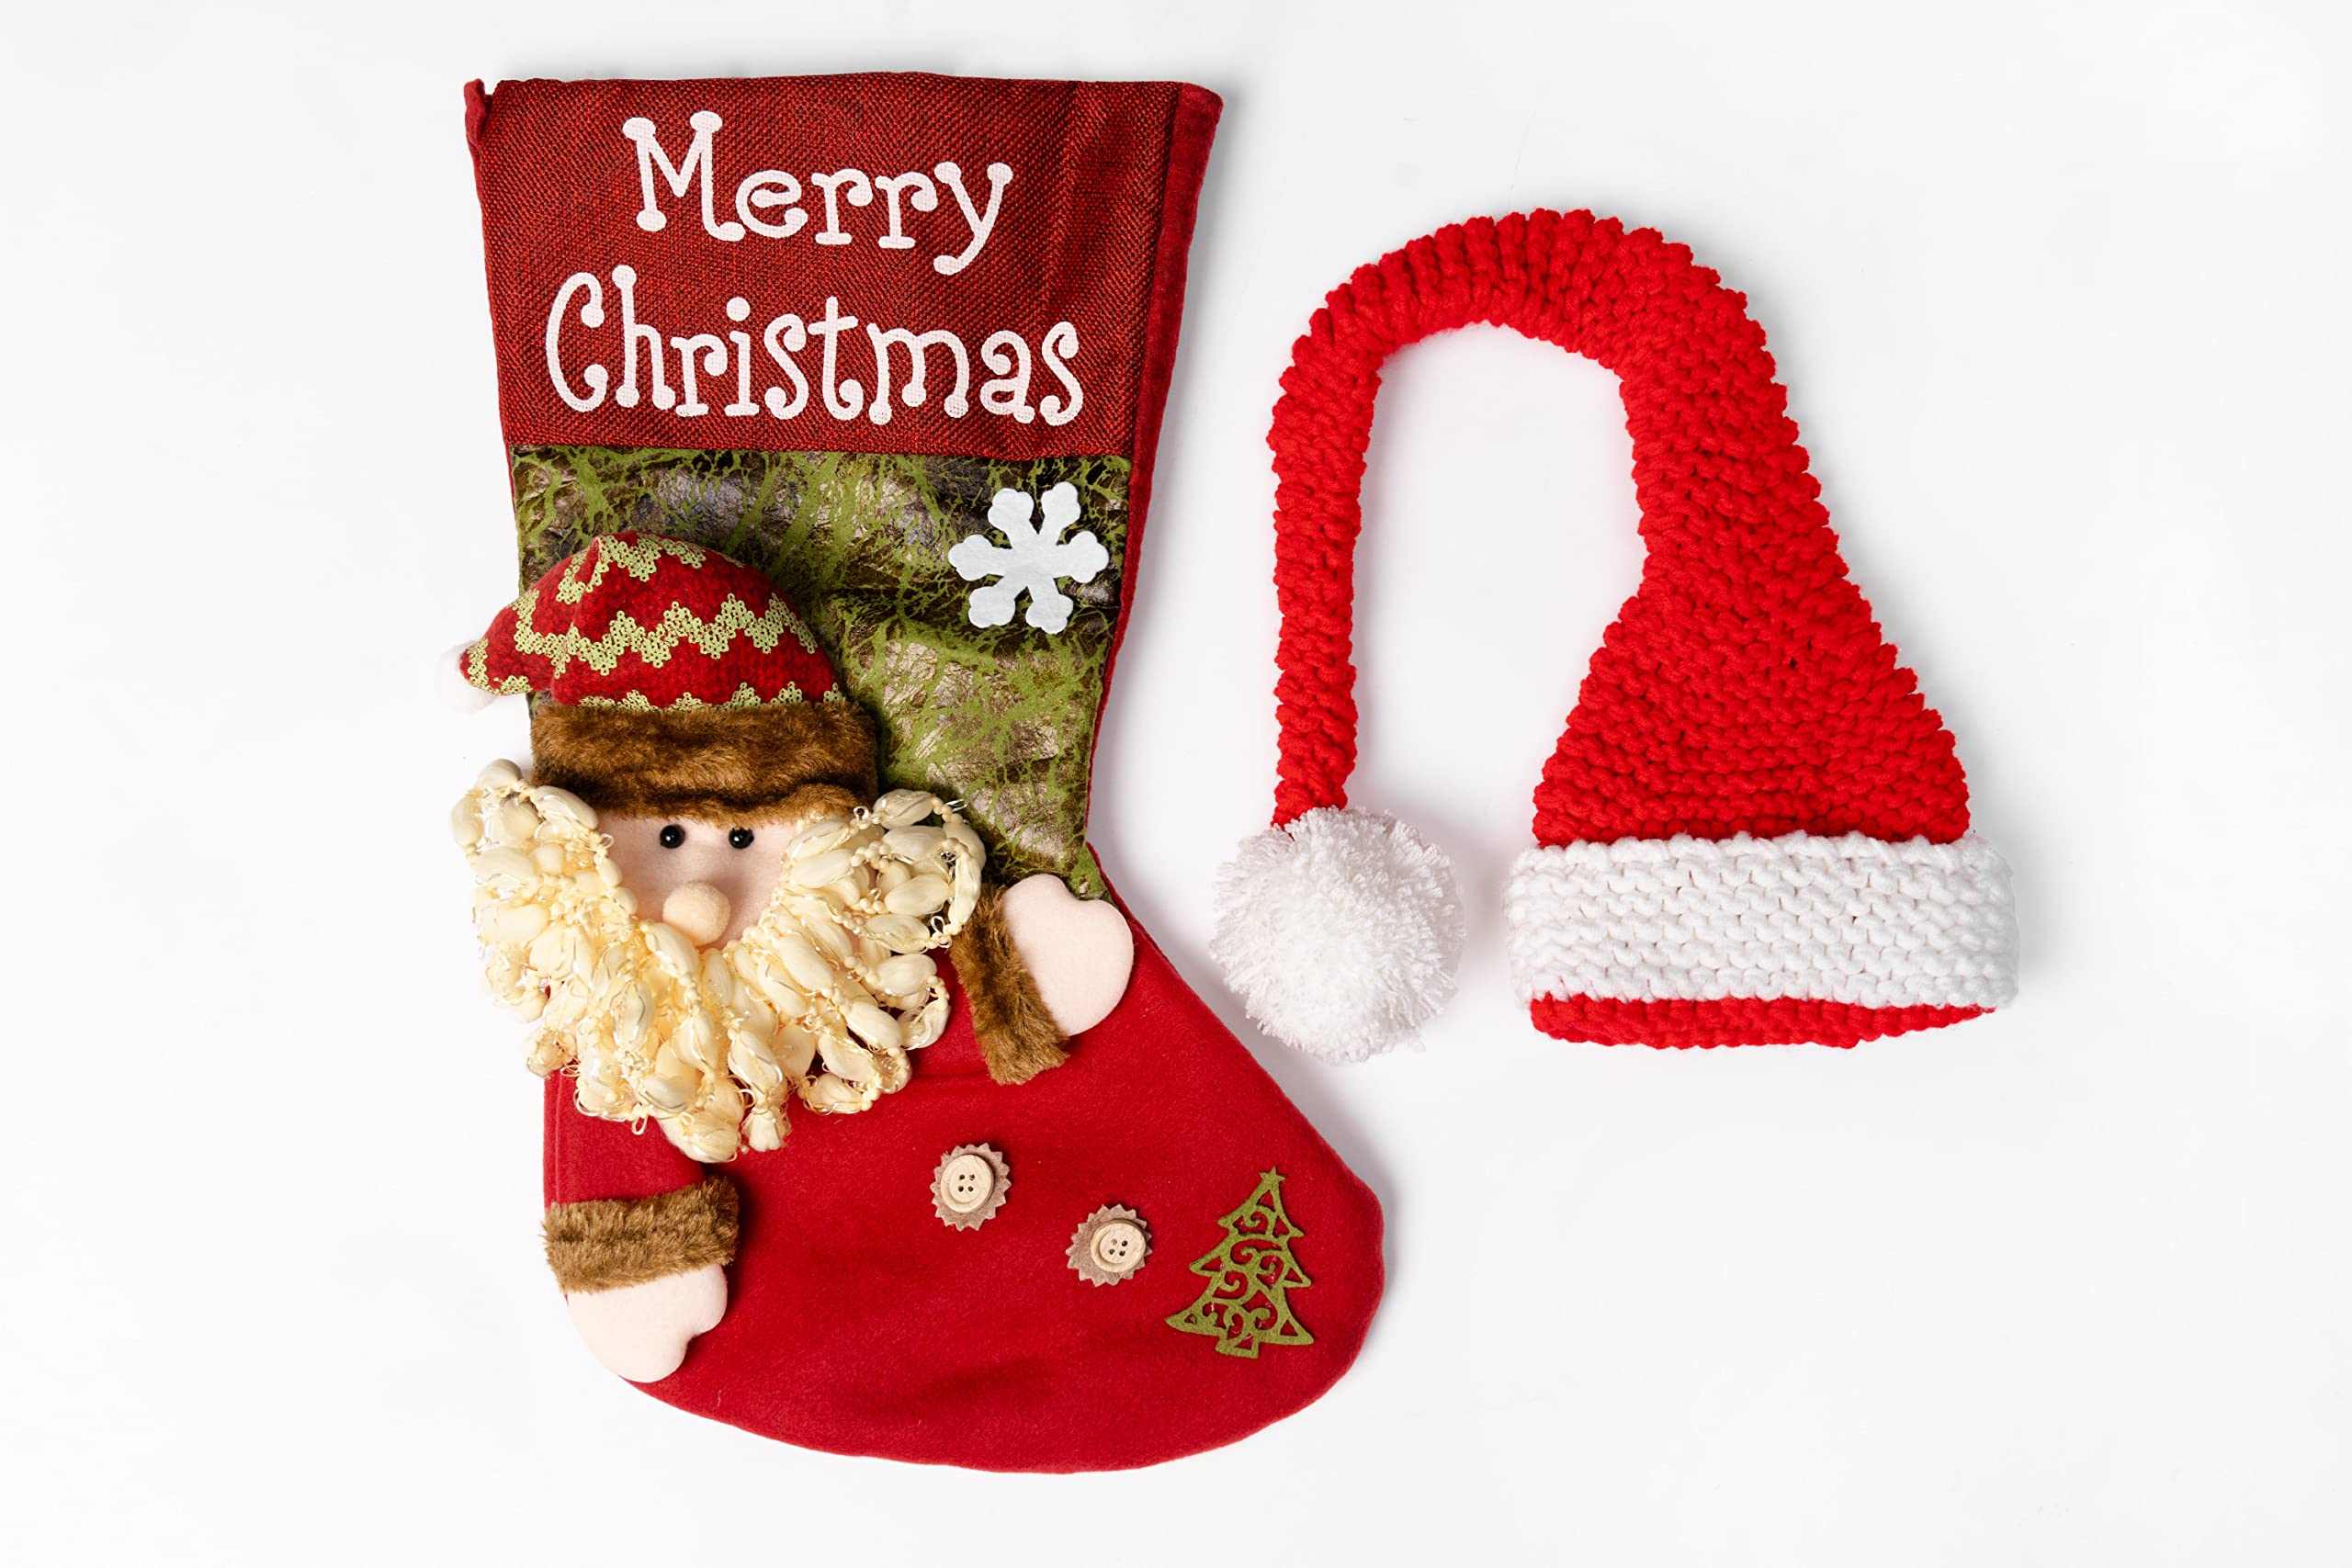 Kate Christmas Newborn Photography Props Baby Photo Outfits Christmas Photo Costume for Baby Red